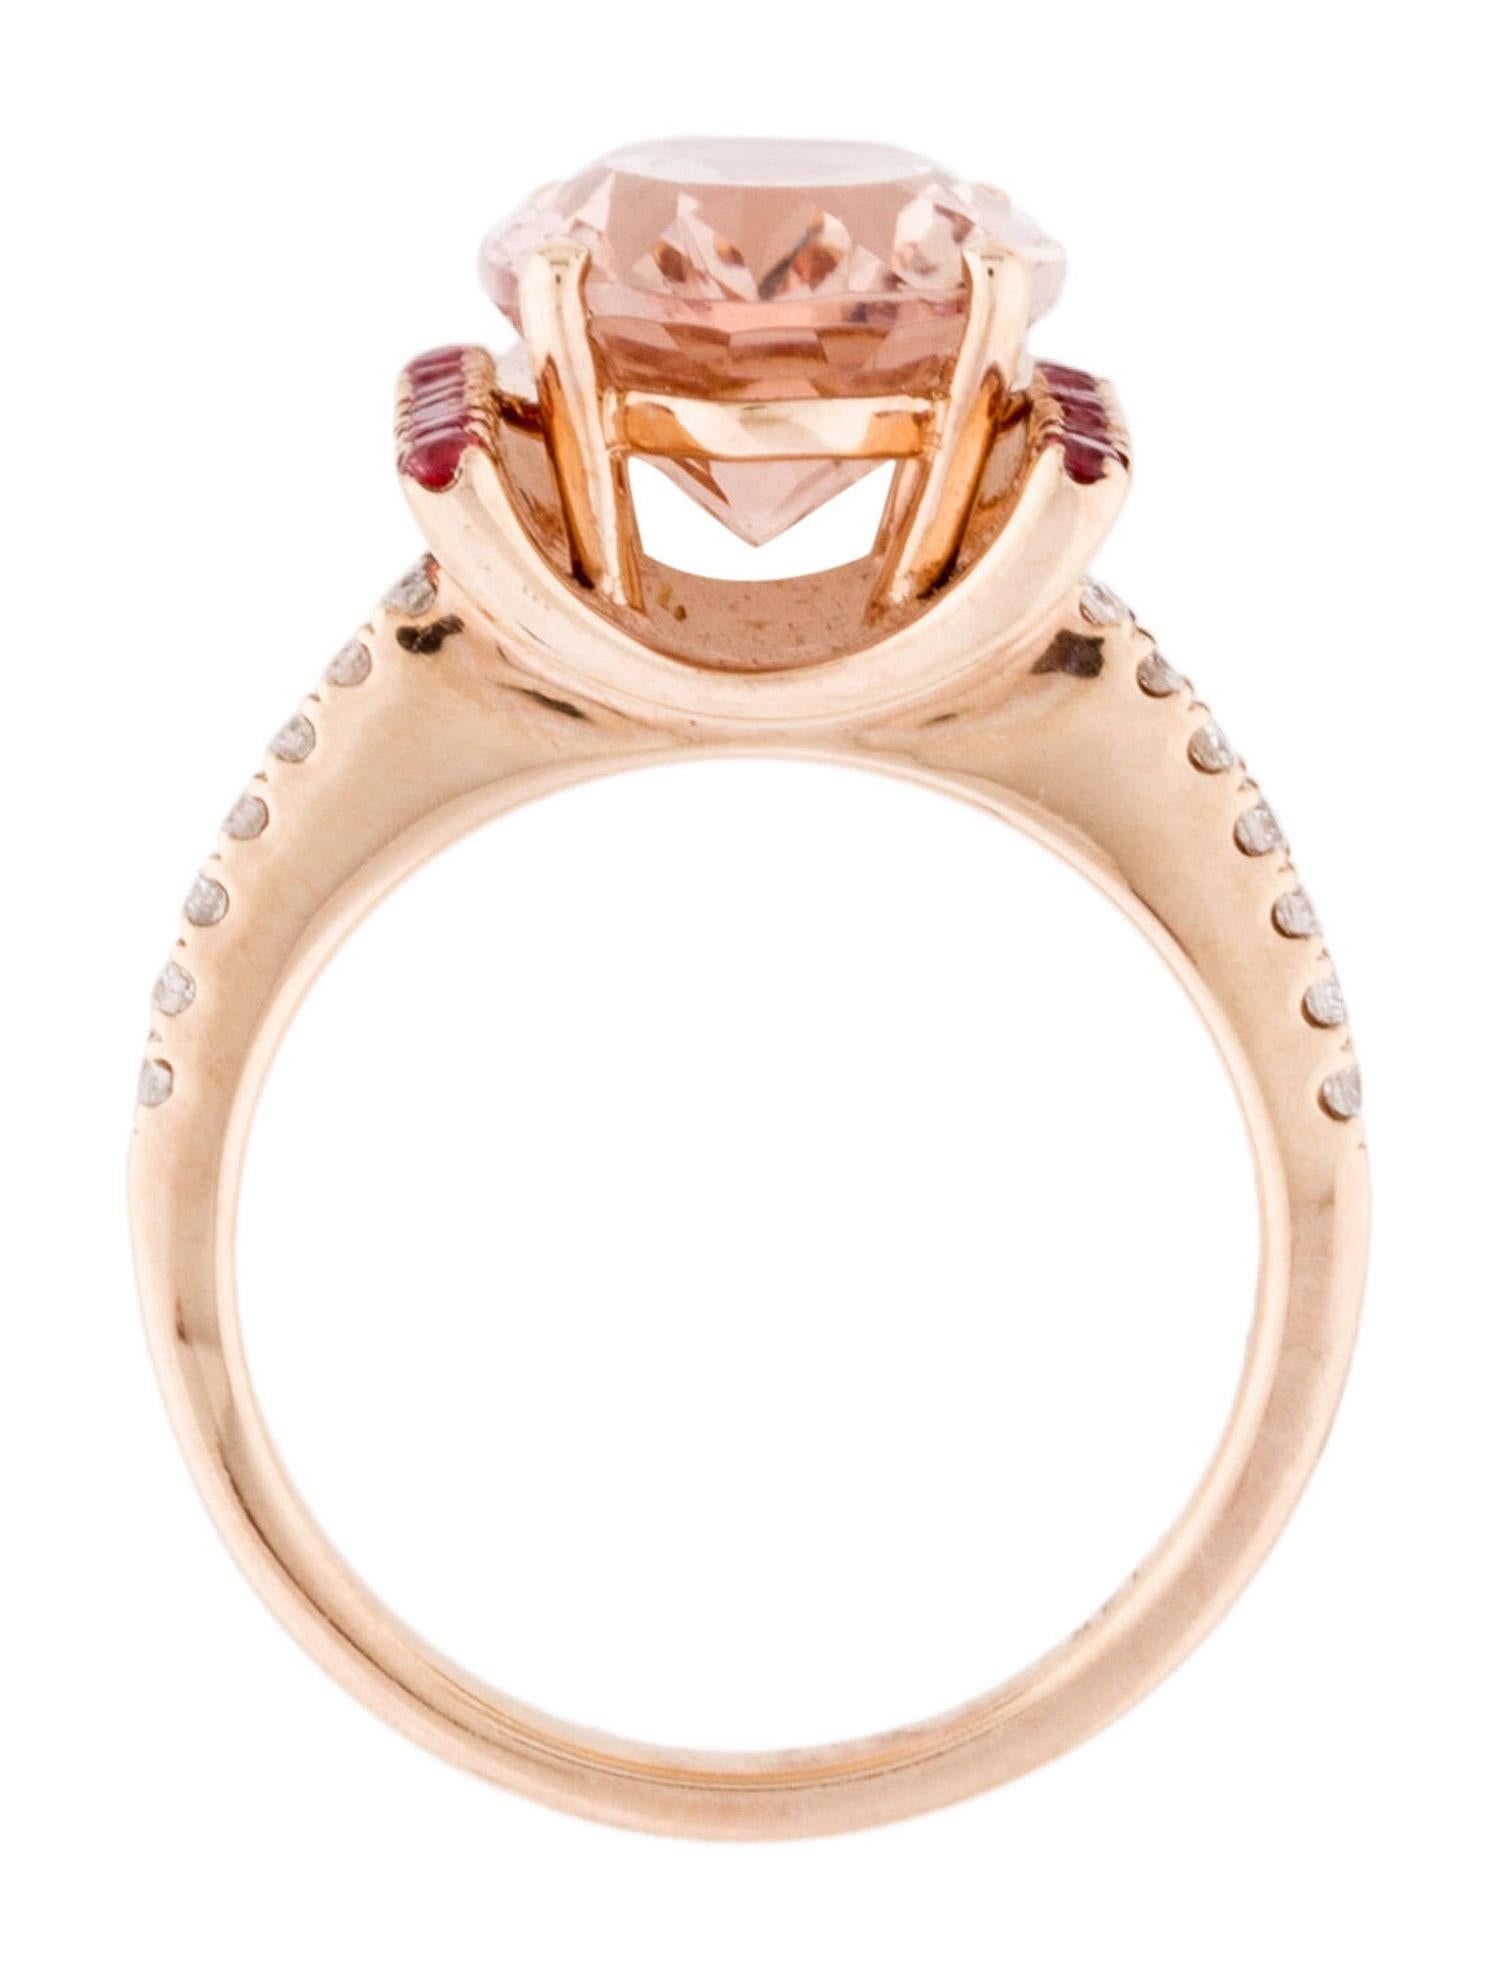 Oval Cut 14K Rose Gold 5.39 Ct Morganite Diamond & Sapphire Queenly Ring For Sale